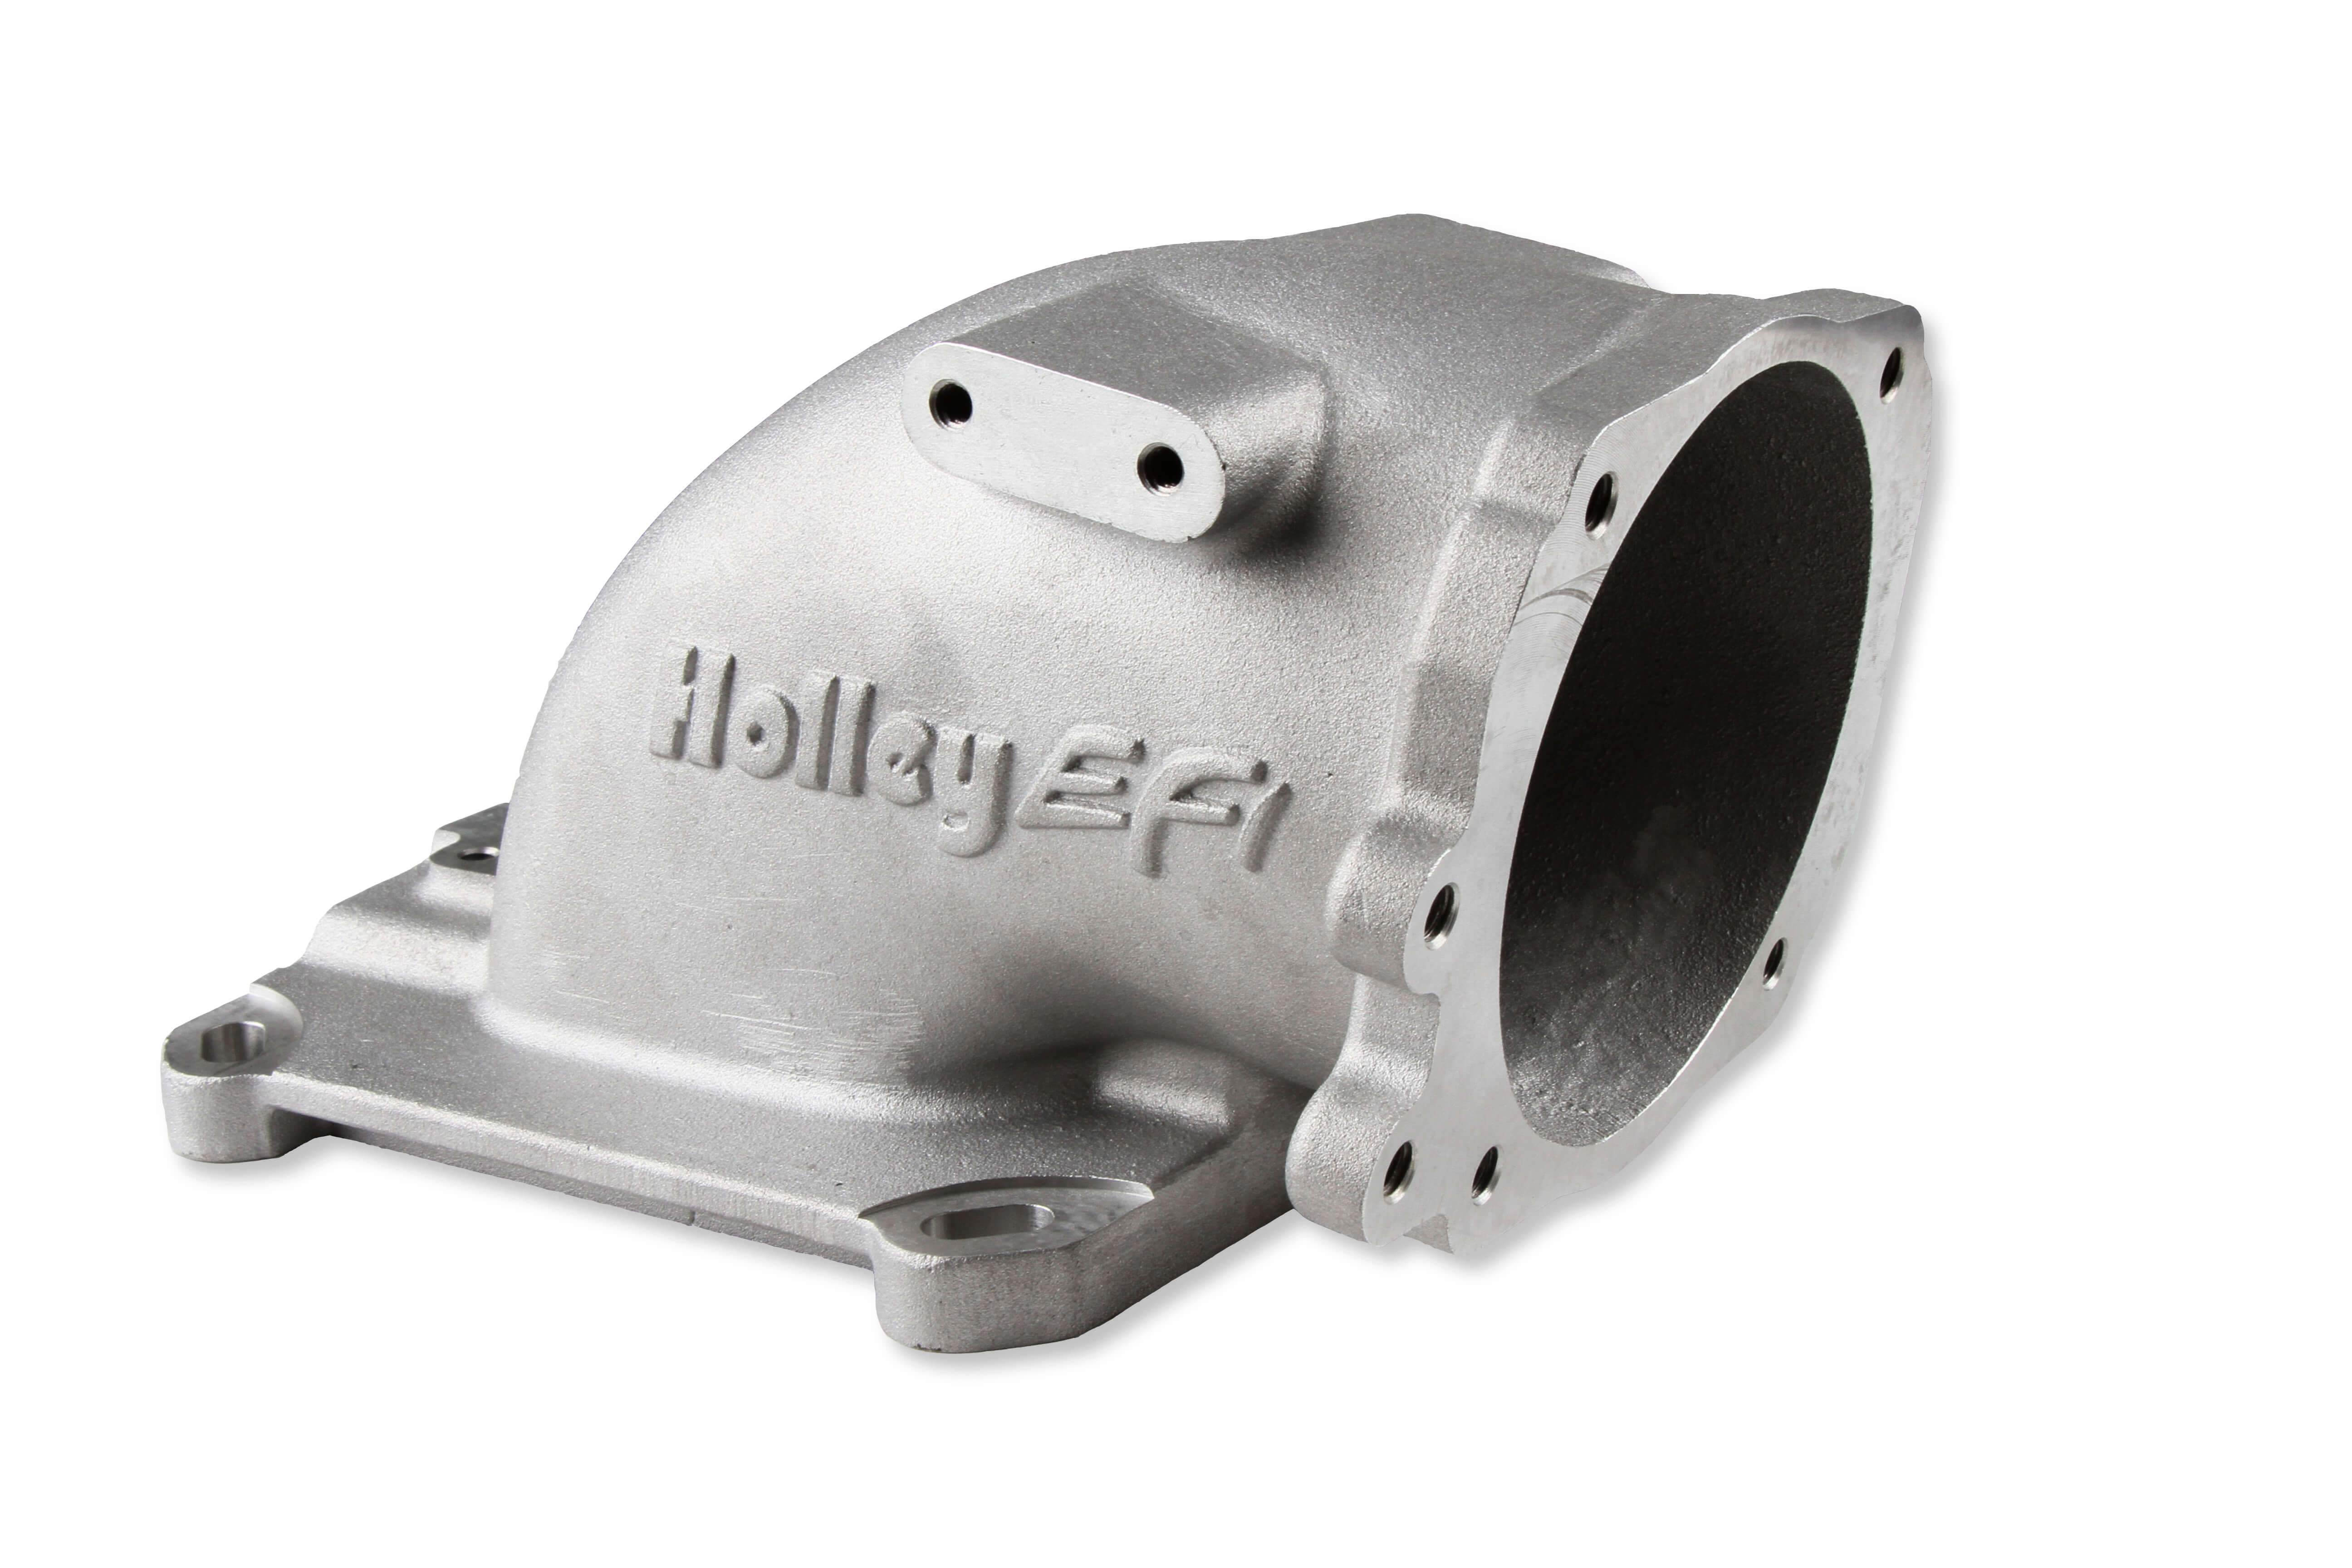 Throttle Body Intake Elbows Ford Performance Holley Performance display